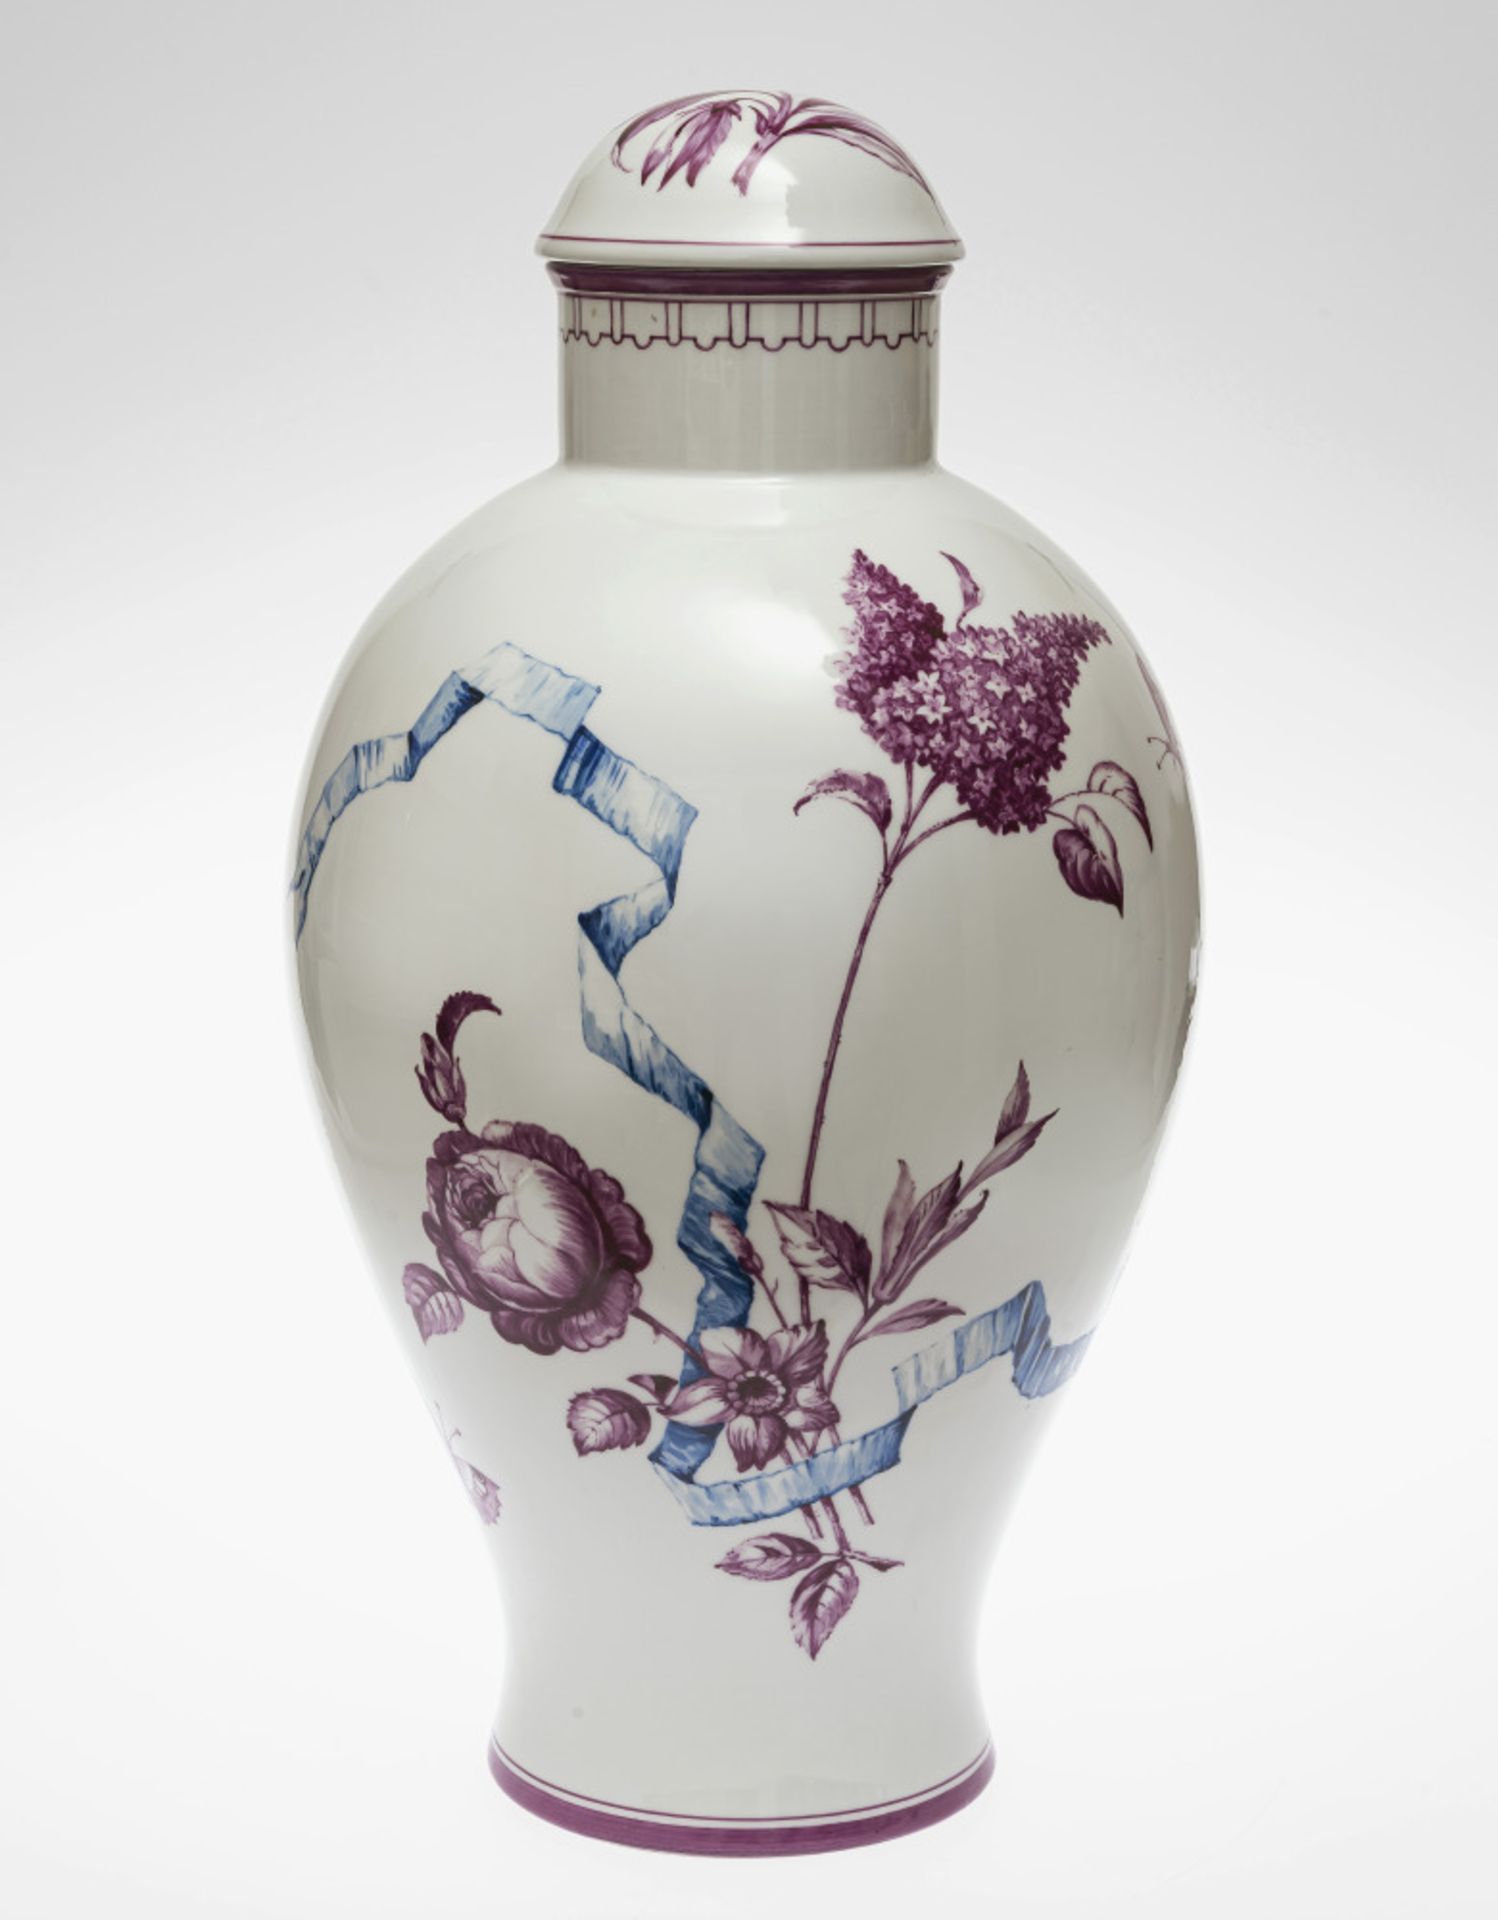 A lidded vase - Nymphenburg, design by Paul Ludwig Troost, as of 1919